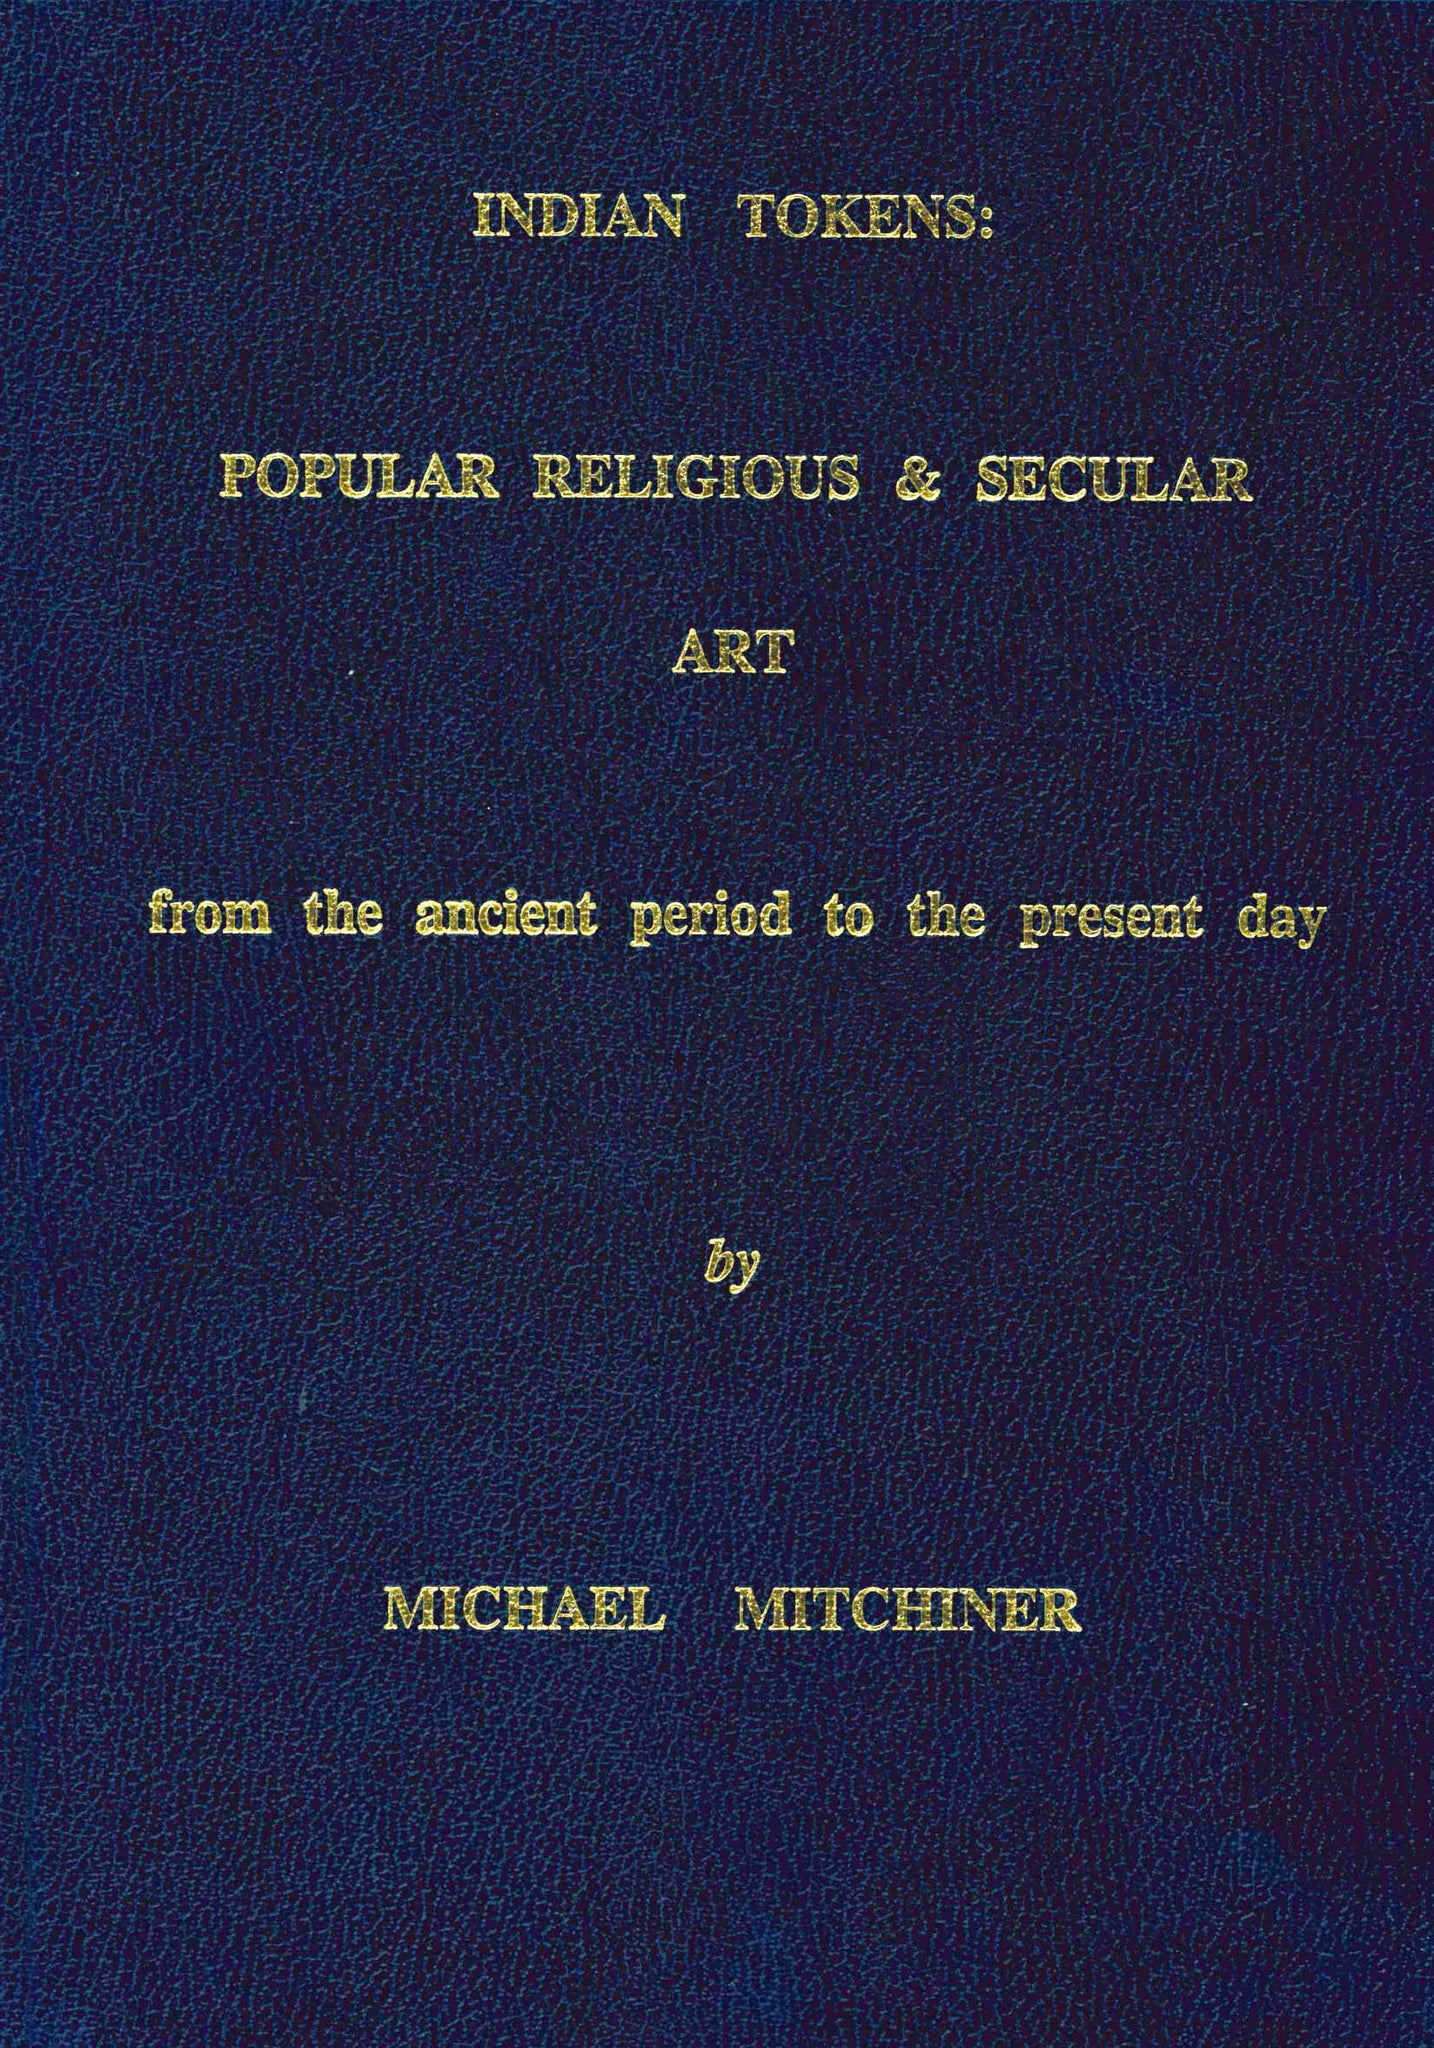 Indian Tokens: Popular Religious & Secular Art from the ancient period to the present day by Michael Mitchiner